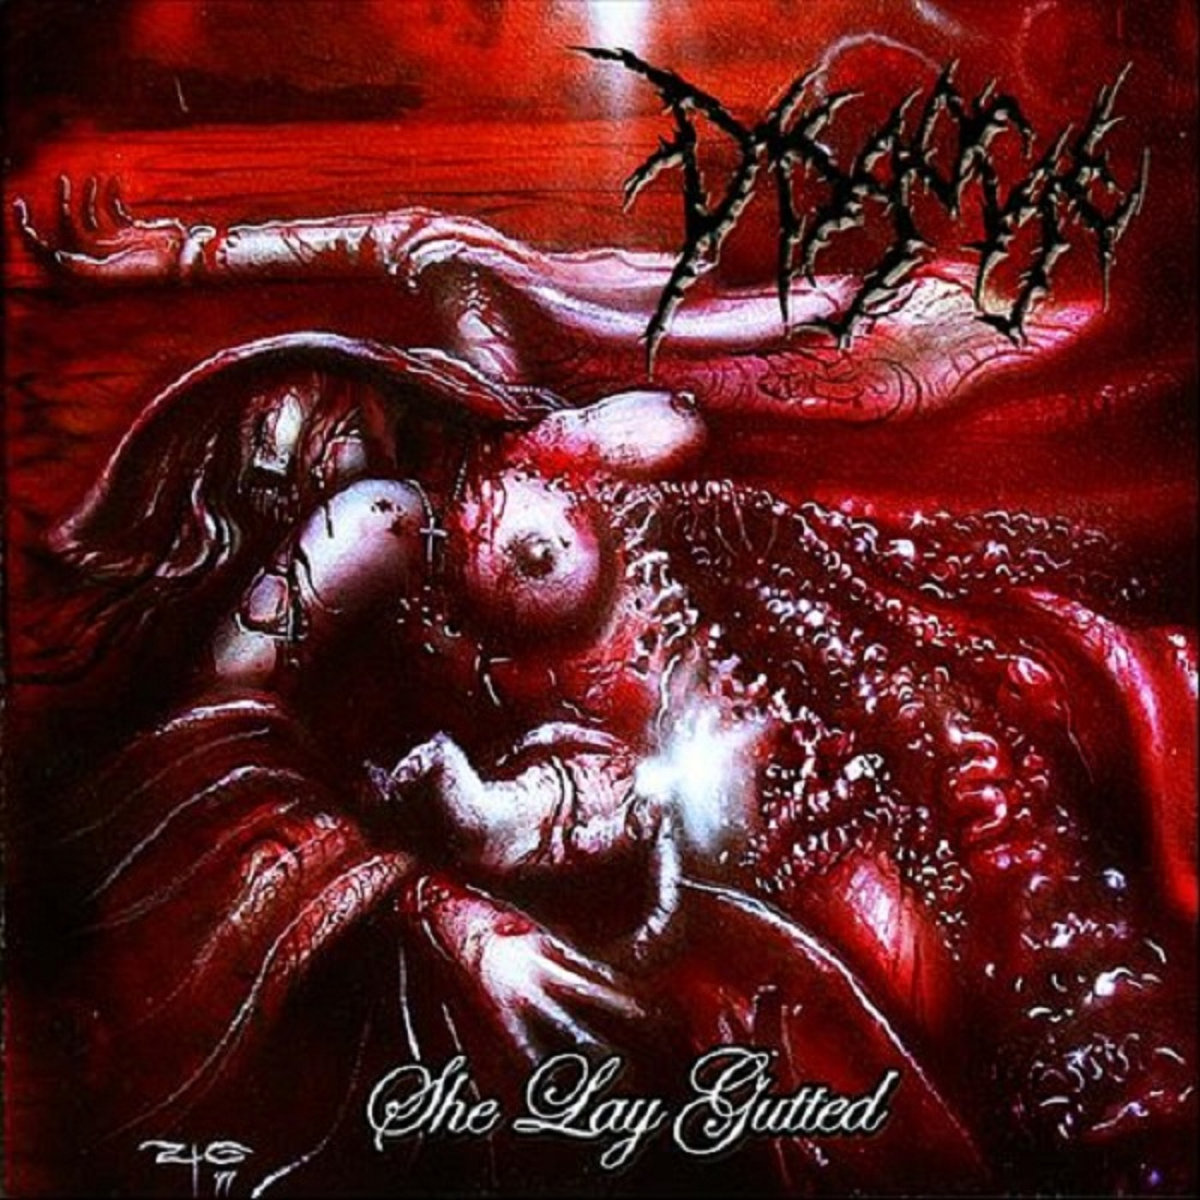 DISGORGE (US) / She Lay Gutted